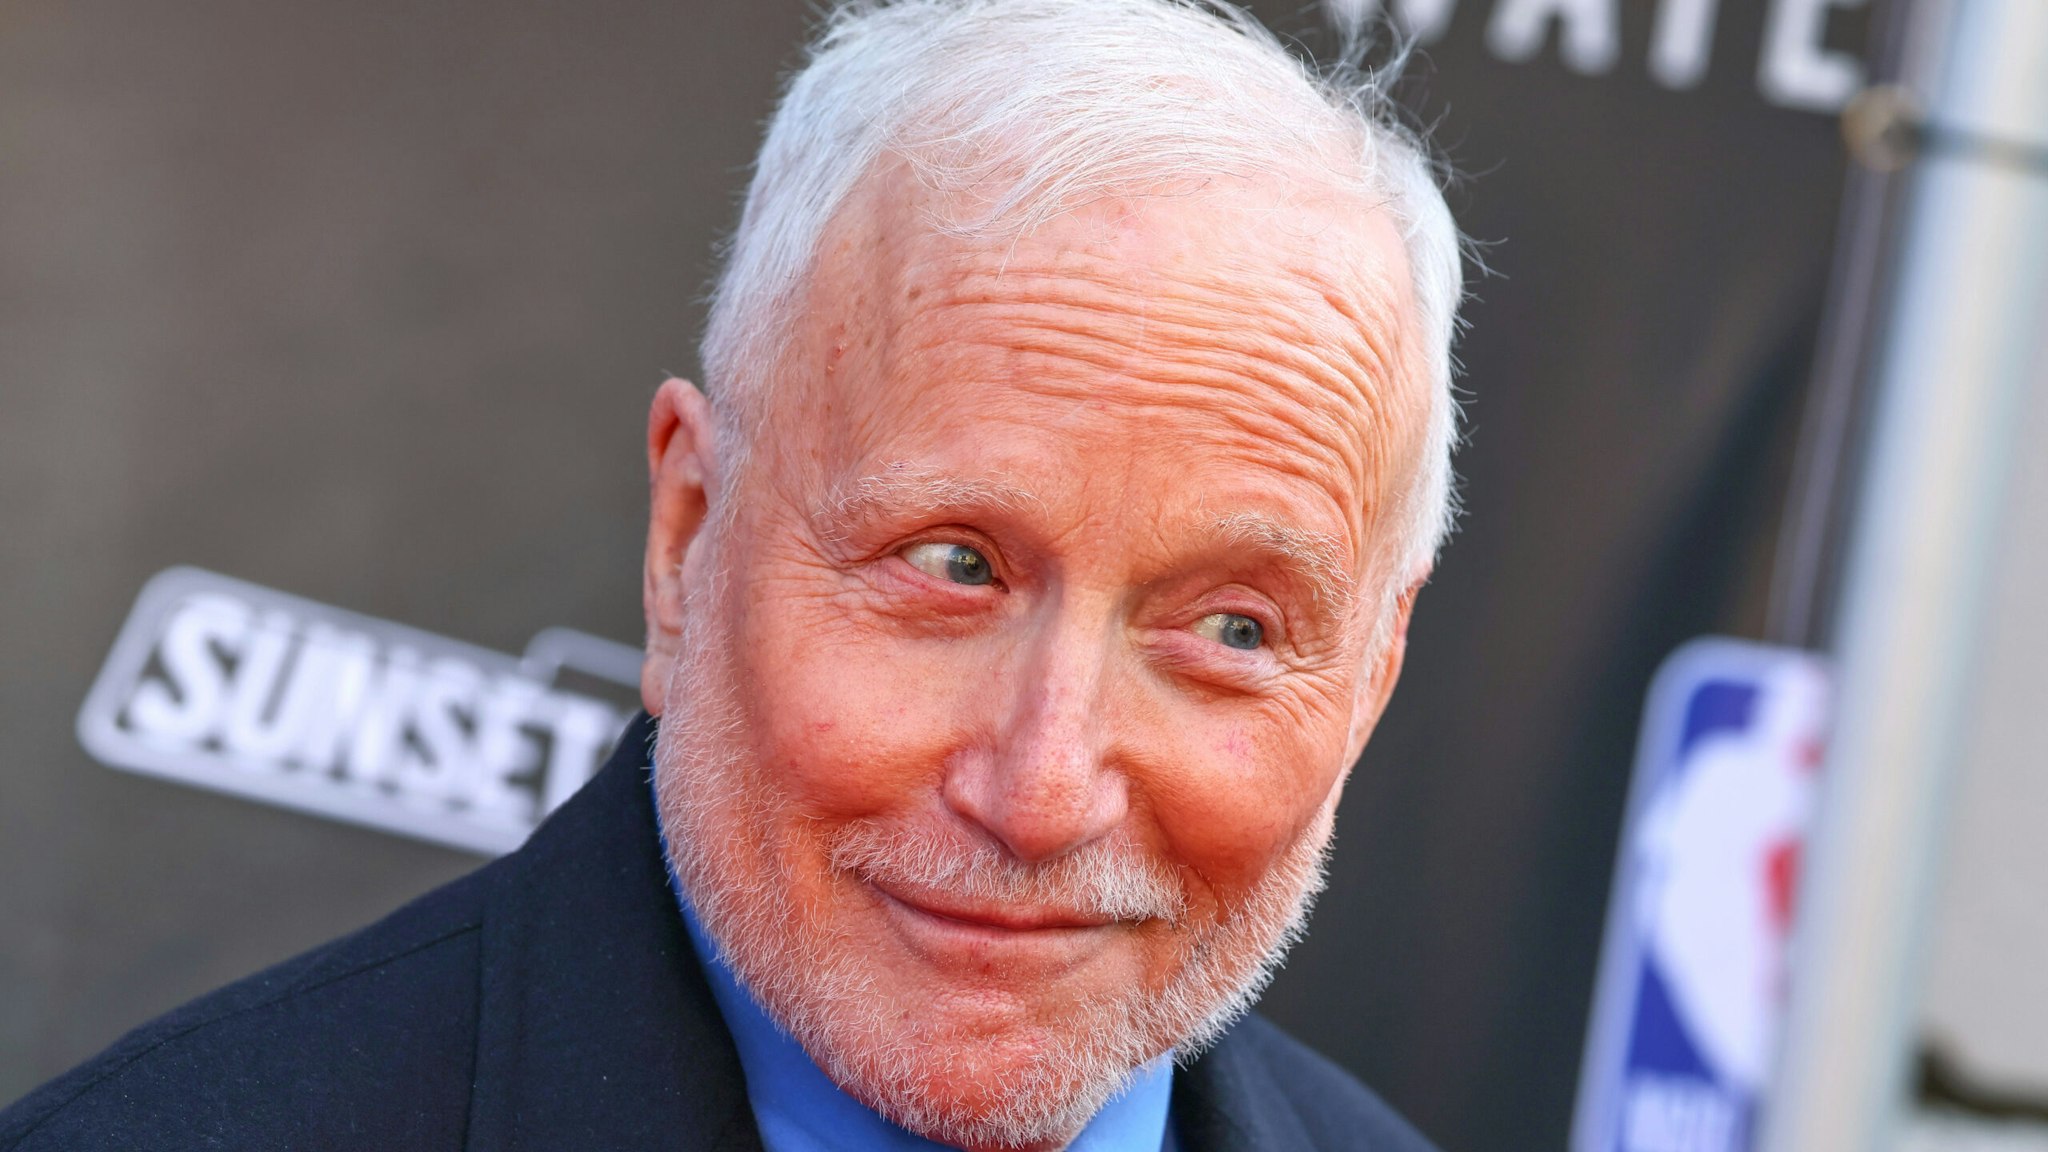 BURBANK, CALIFORNIA - APRIL 11: Richard Dreyfuss attends the Los Angeles premiere of "Sweetwater" at Steven J. Ross Theatre on the Warner Bros. Lot on April 11, 2023 in Burbank, California.